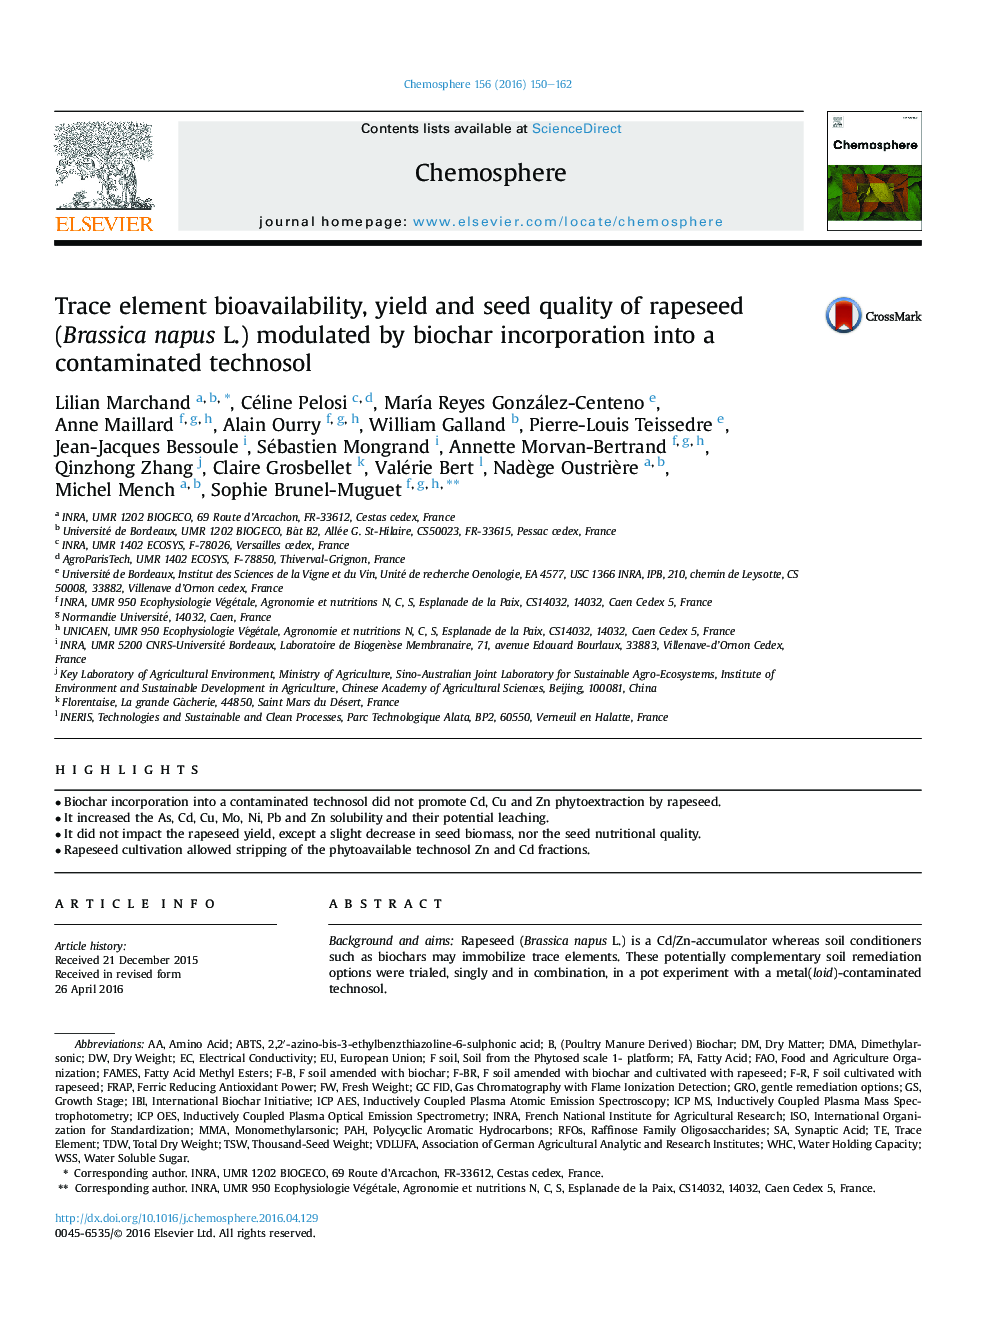 Trace element bioavailability, yield and seed quality of rapeseed (Brassica napus L.) modulated by biochar incorporation into a contaminated technosol